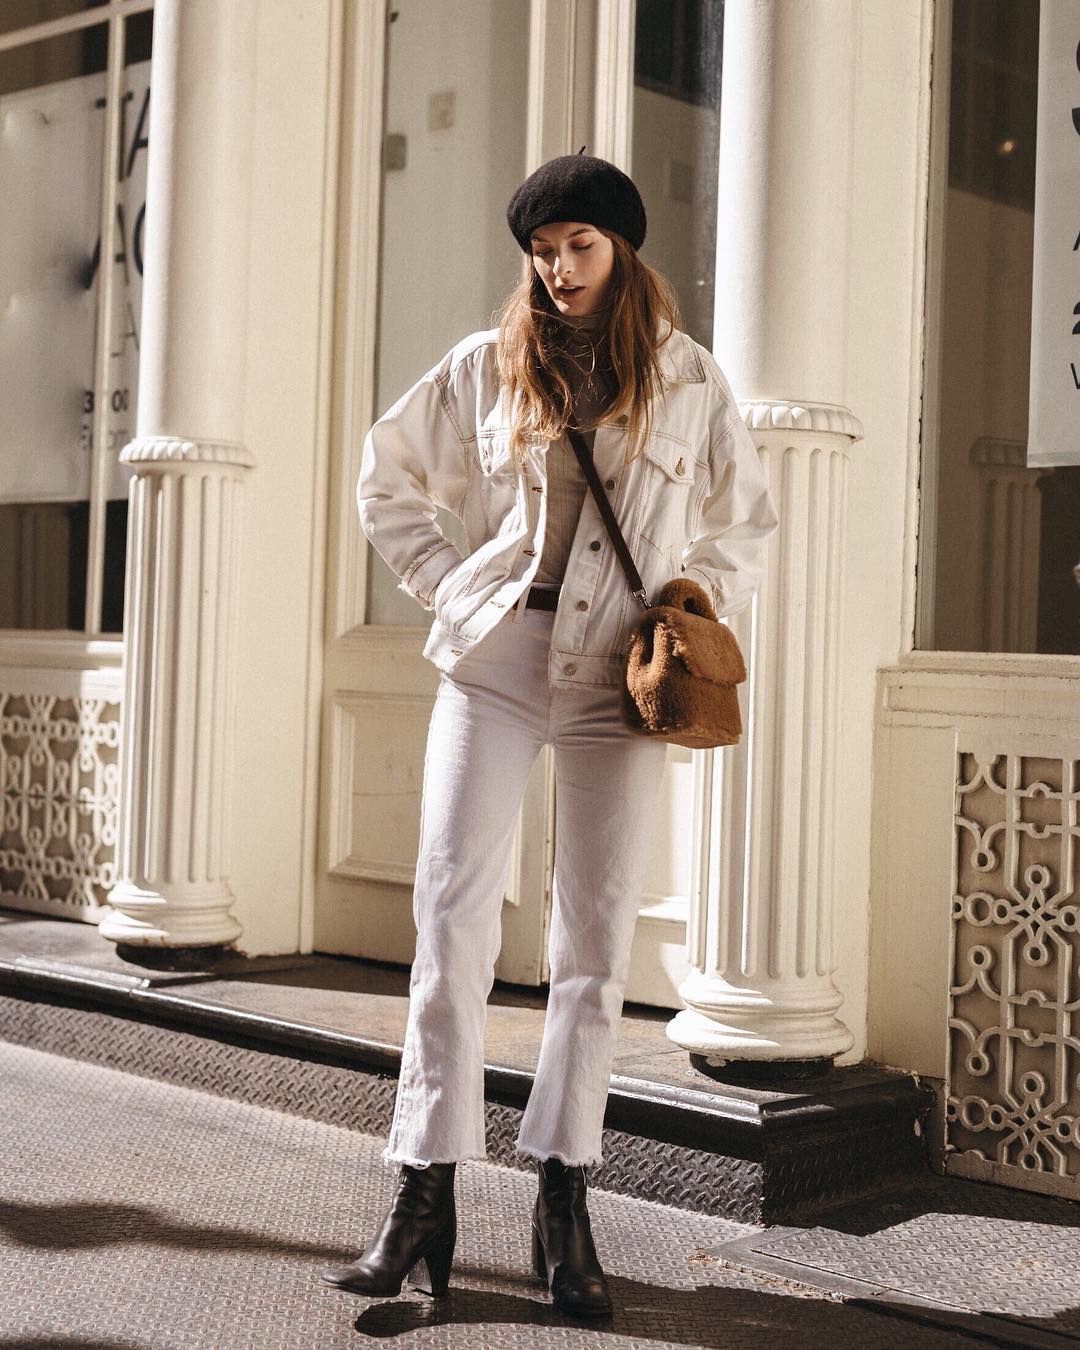 25 of the Best White Denim Pieces for Fall and Winter